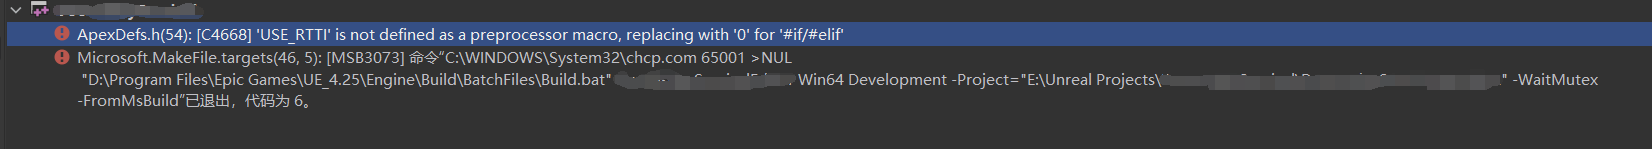 Error C4668 : 'USE_RTTI' is not defined as a preprocessor macro, replacing with '0' for '#if/#elif'